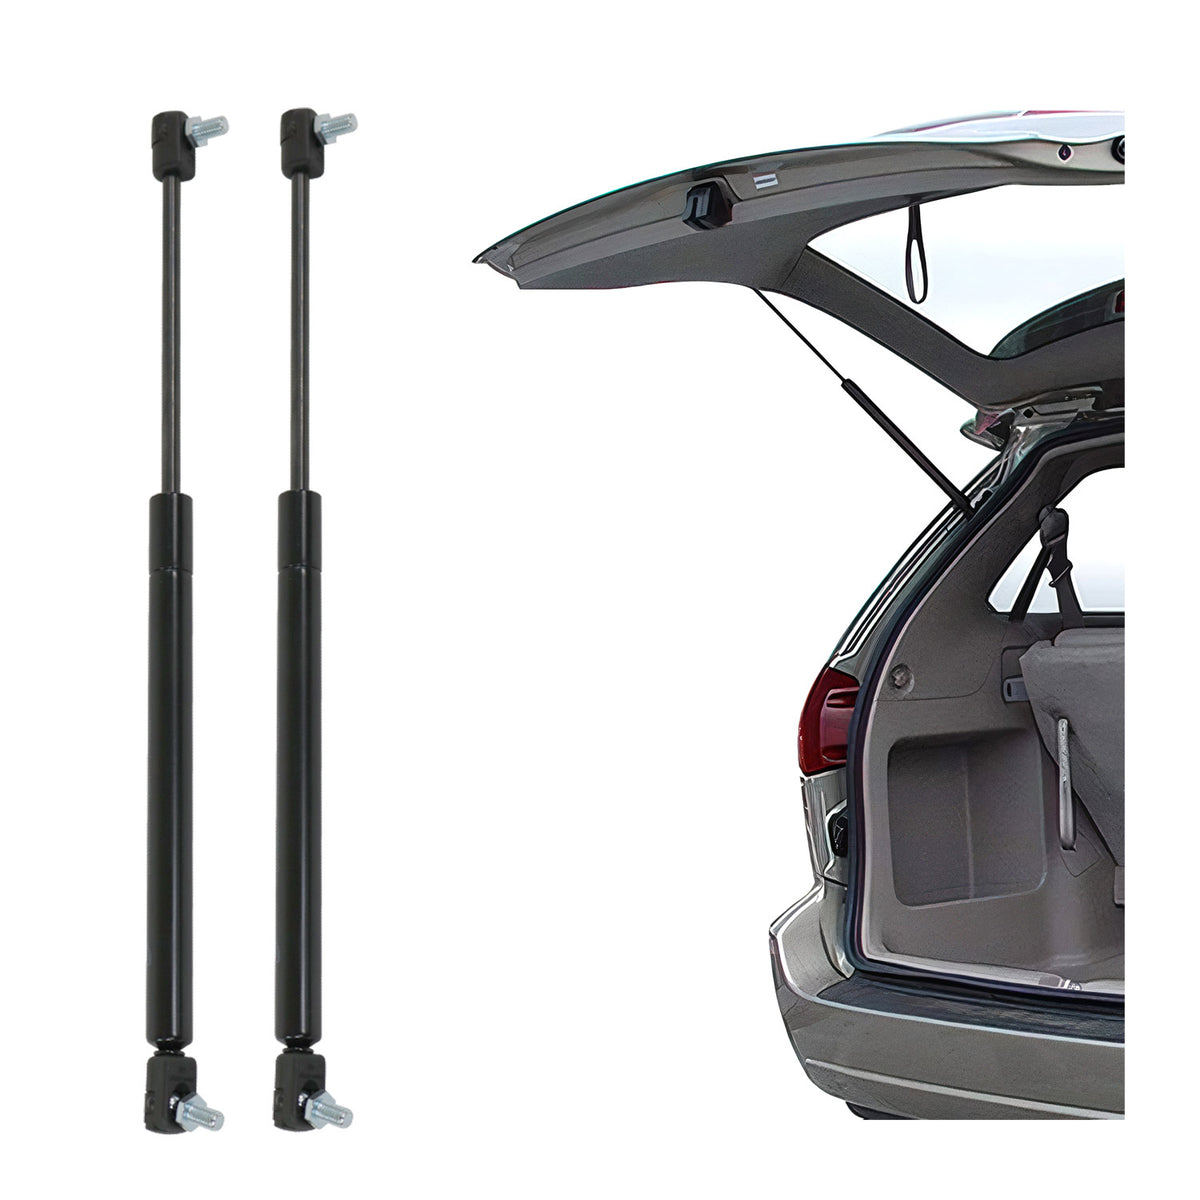 2x tailgate damper gas spring damper for BMW X3 E83 2004-2010 stainless steel